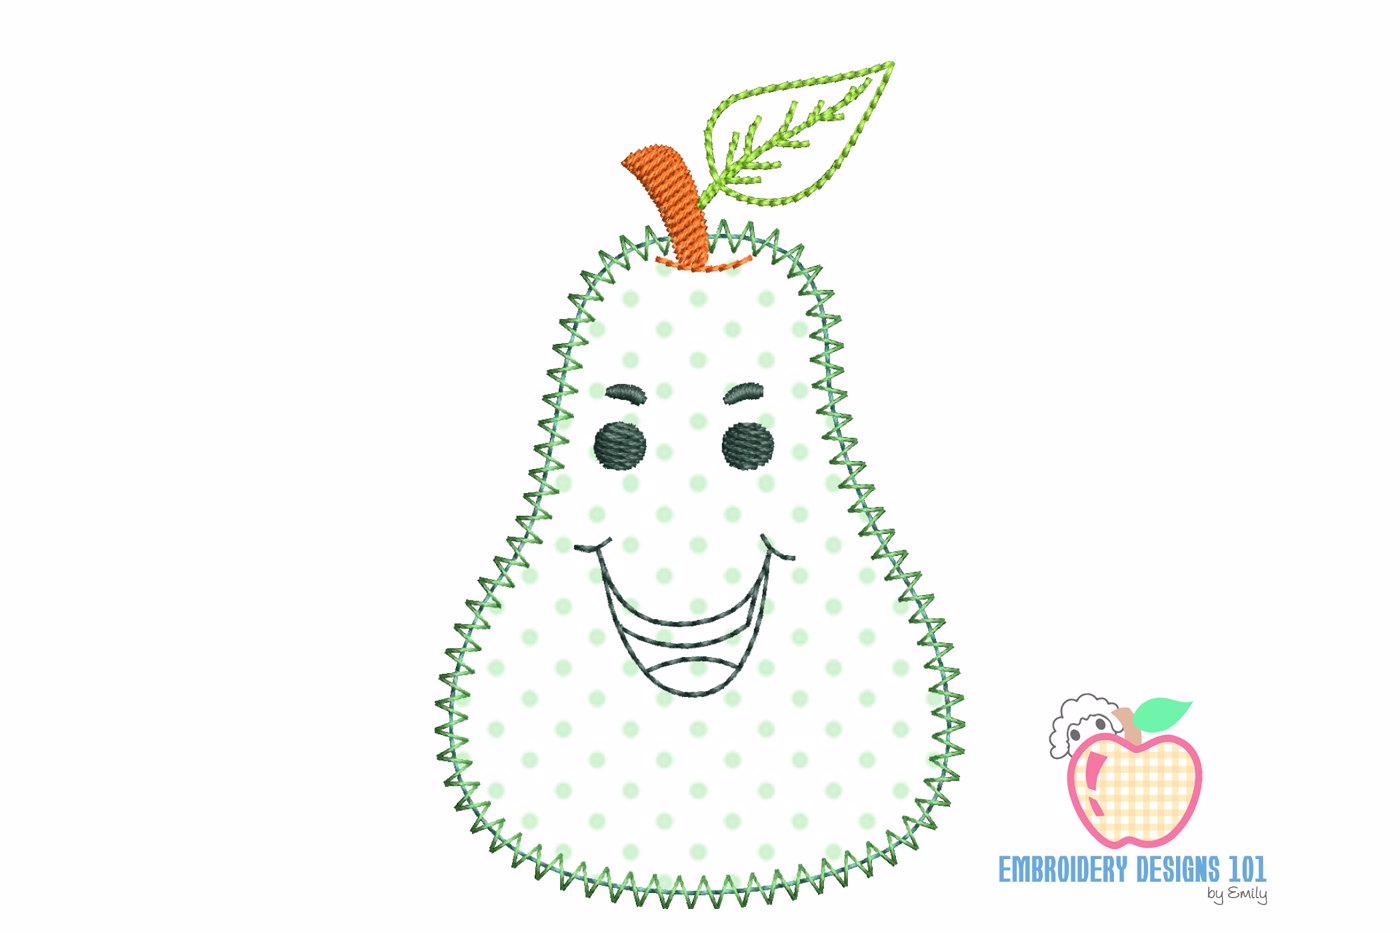 Cartoon Of Pear With The Leaf Applique